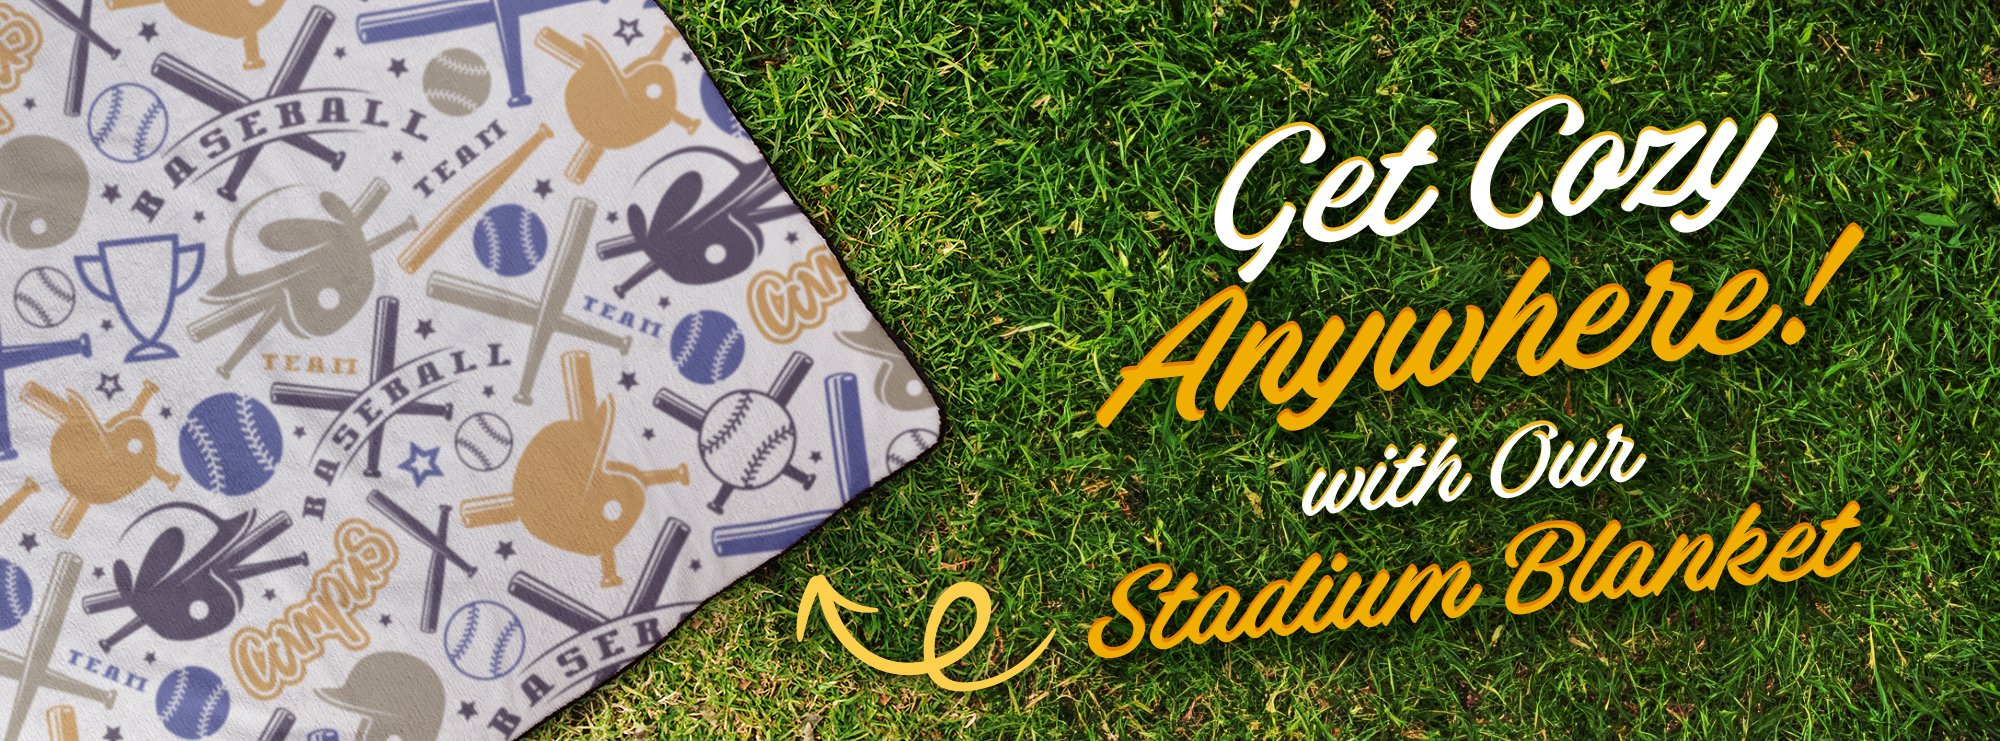 Touchdown Comfort: Discover the Ultimate Stadium Blanket Experience!